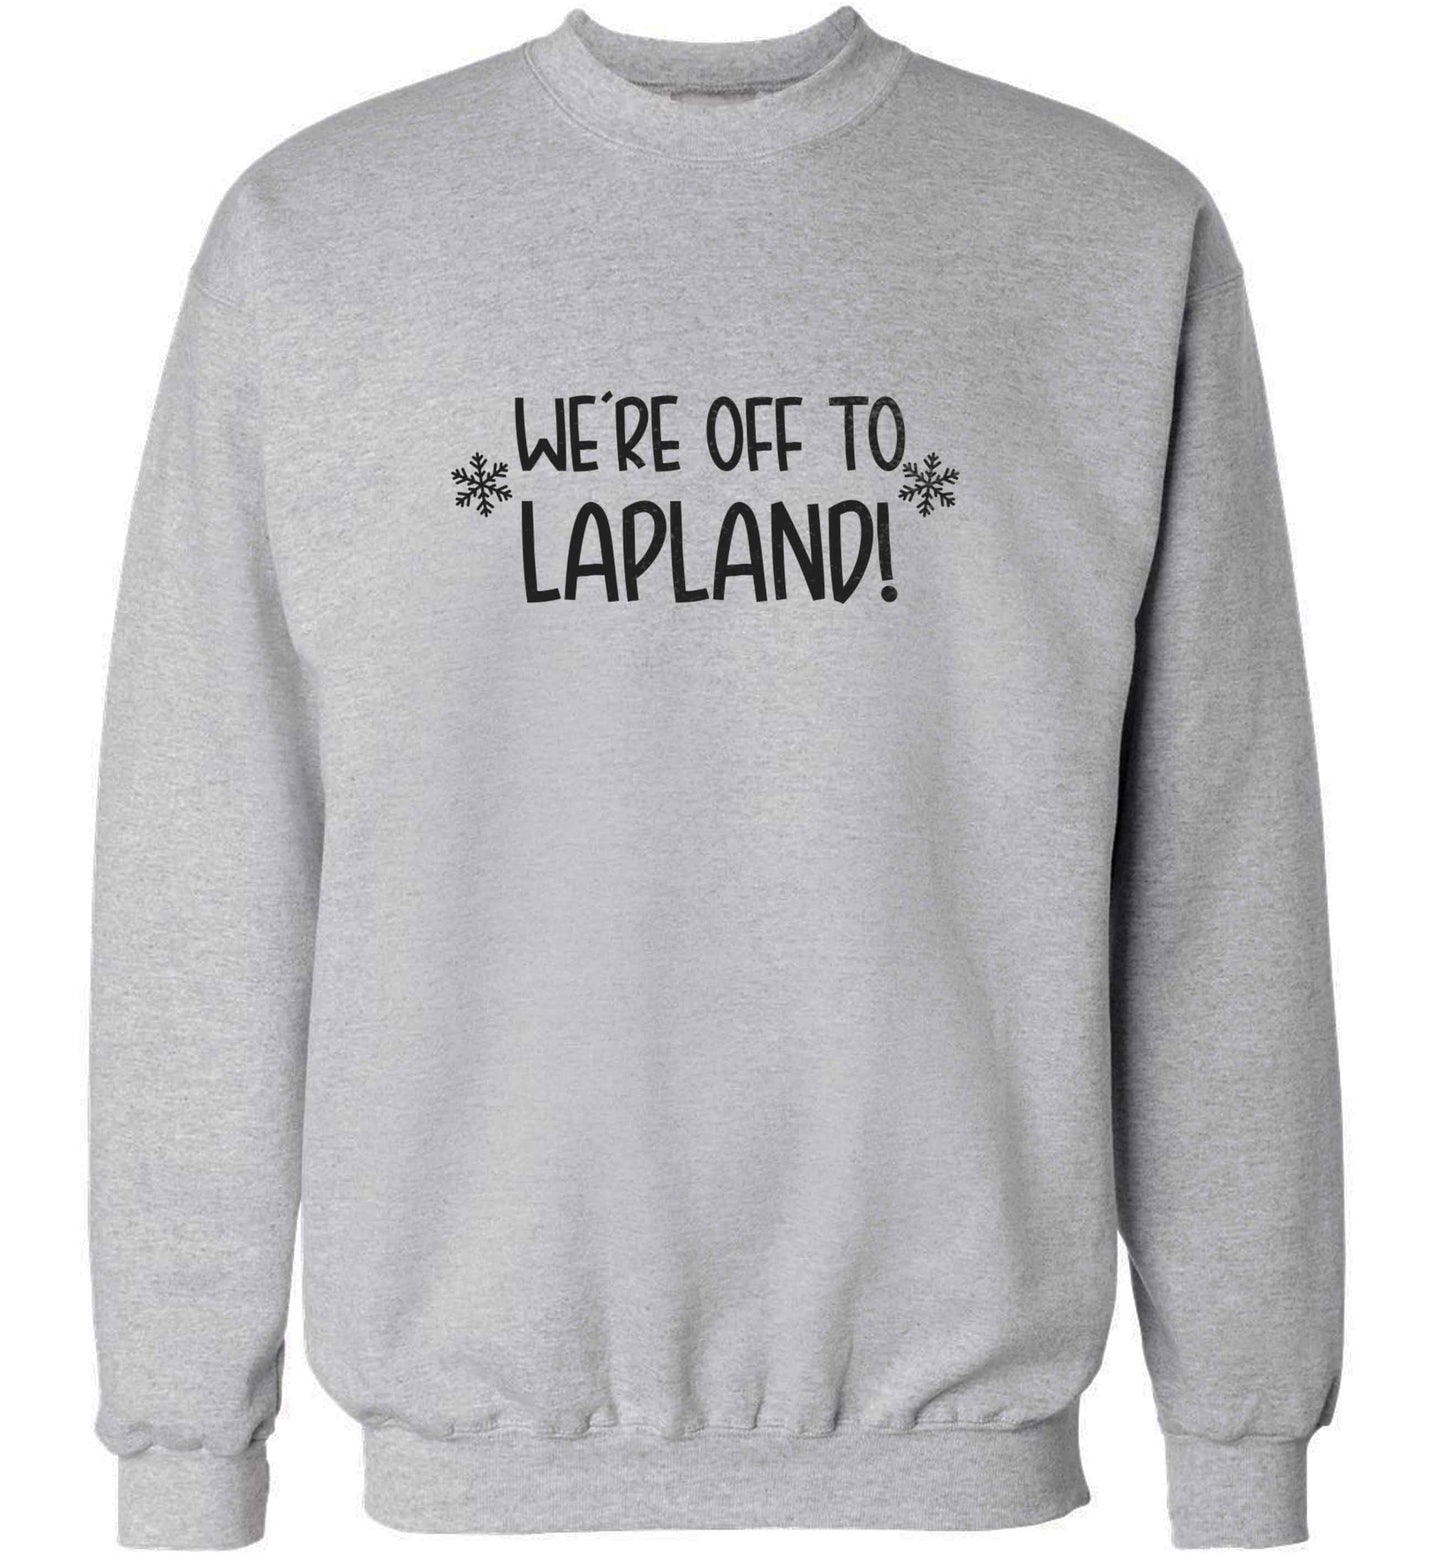 We're off to Lapland adult's unisex grey sweater 2XL